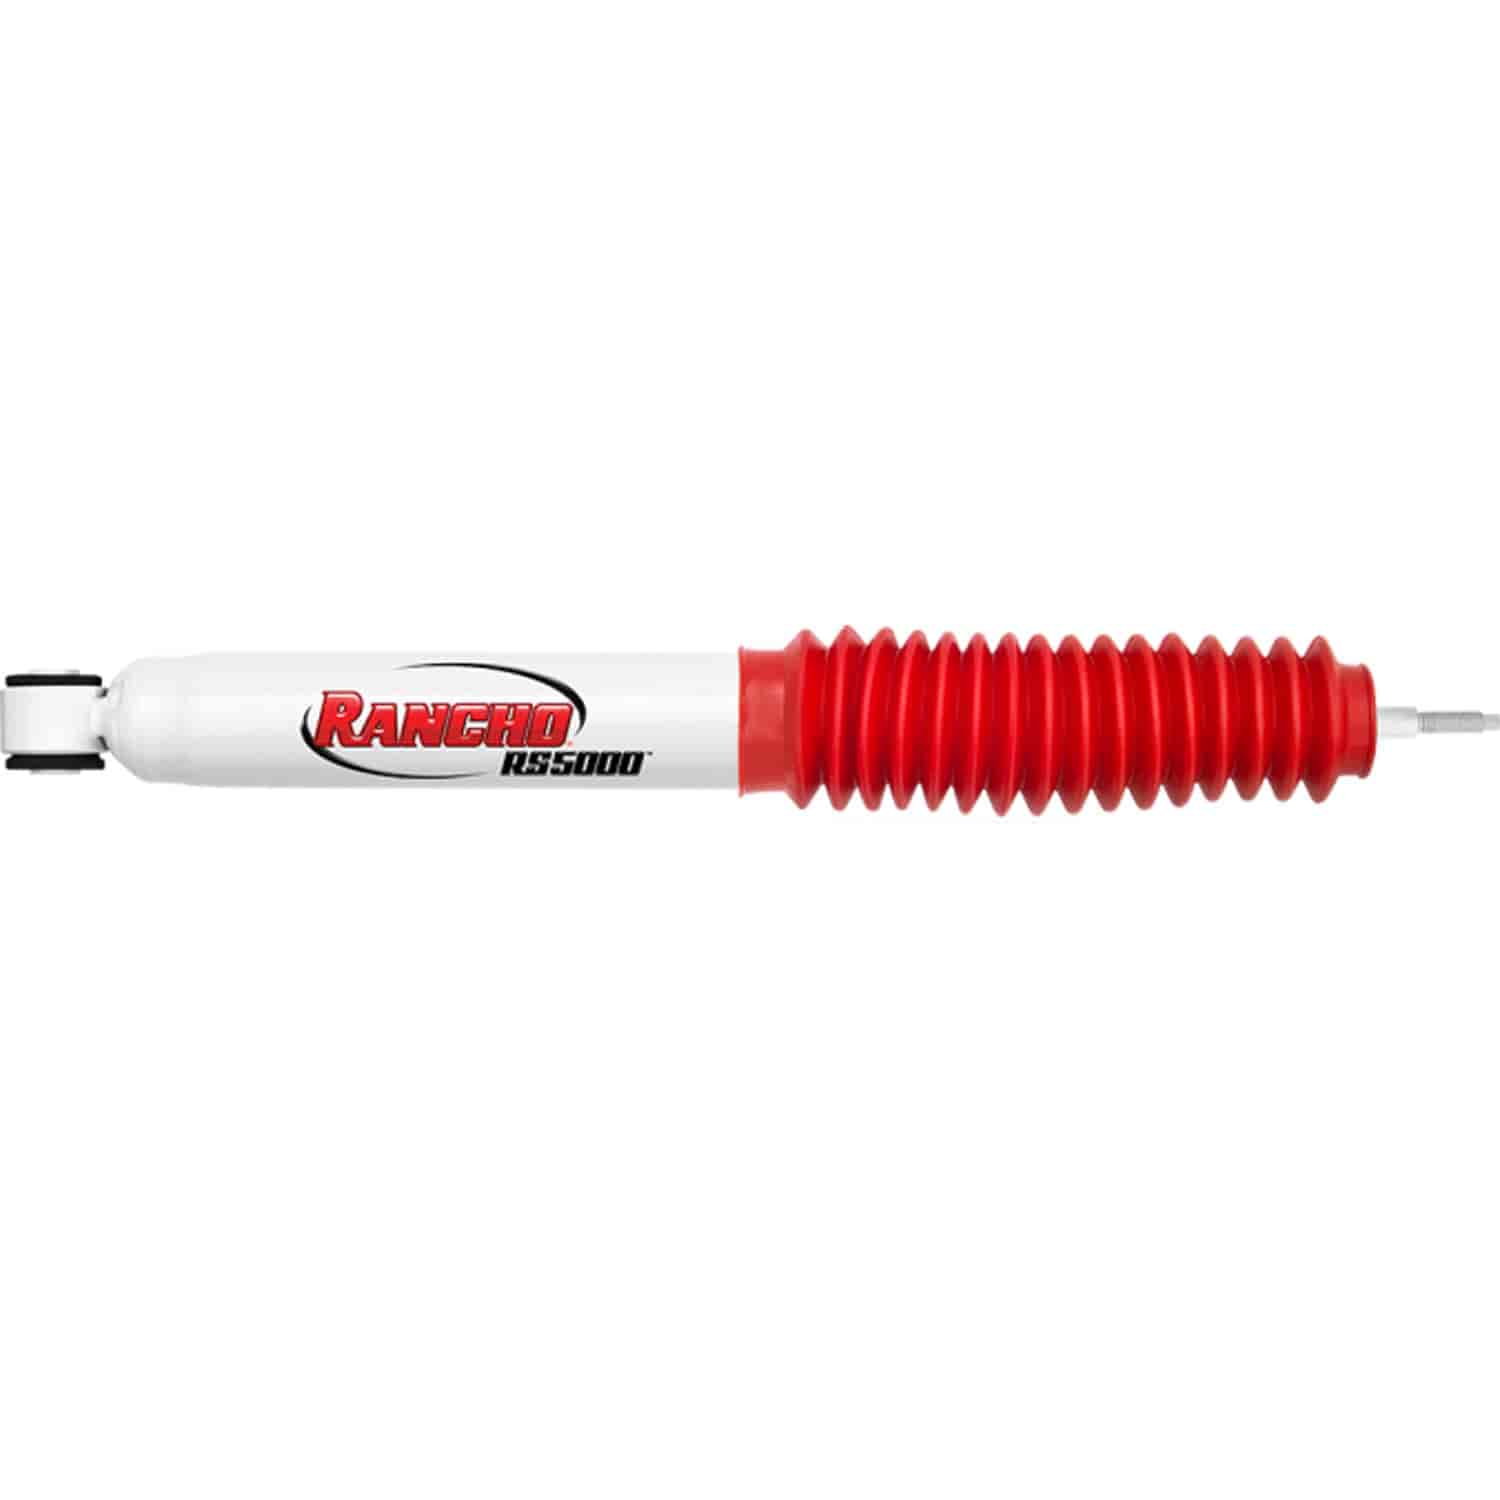 RS5000 Front Shock Absorber Fits Ford Expedition and F150/F250